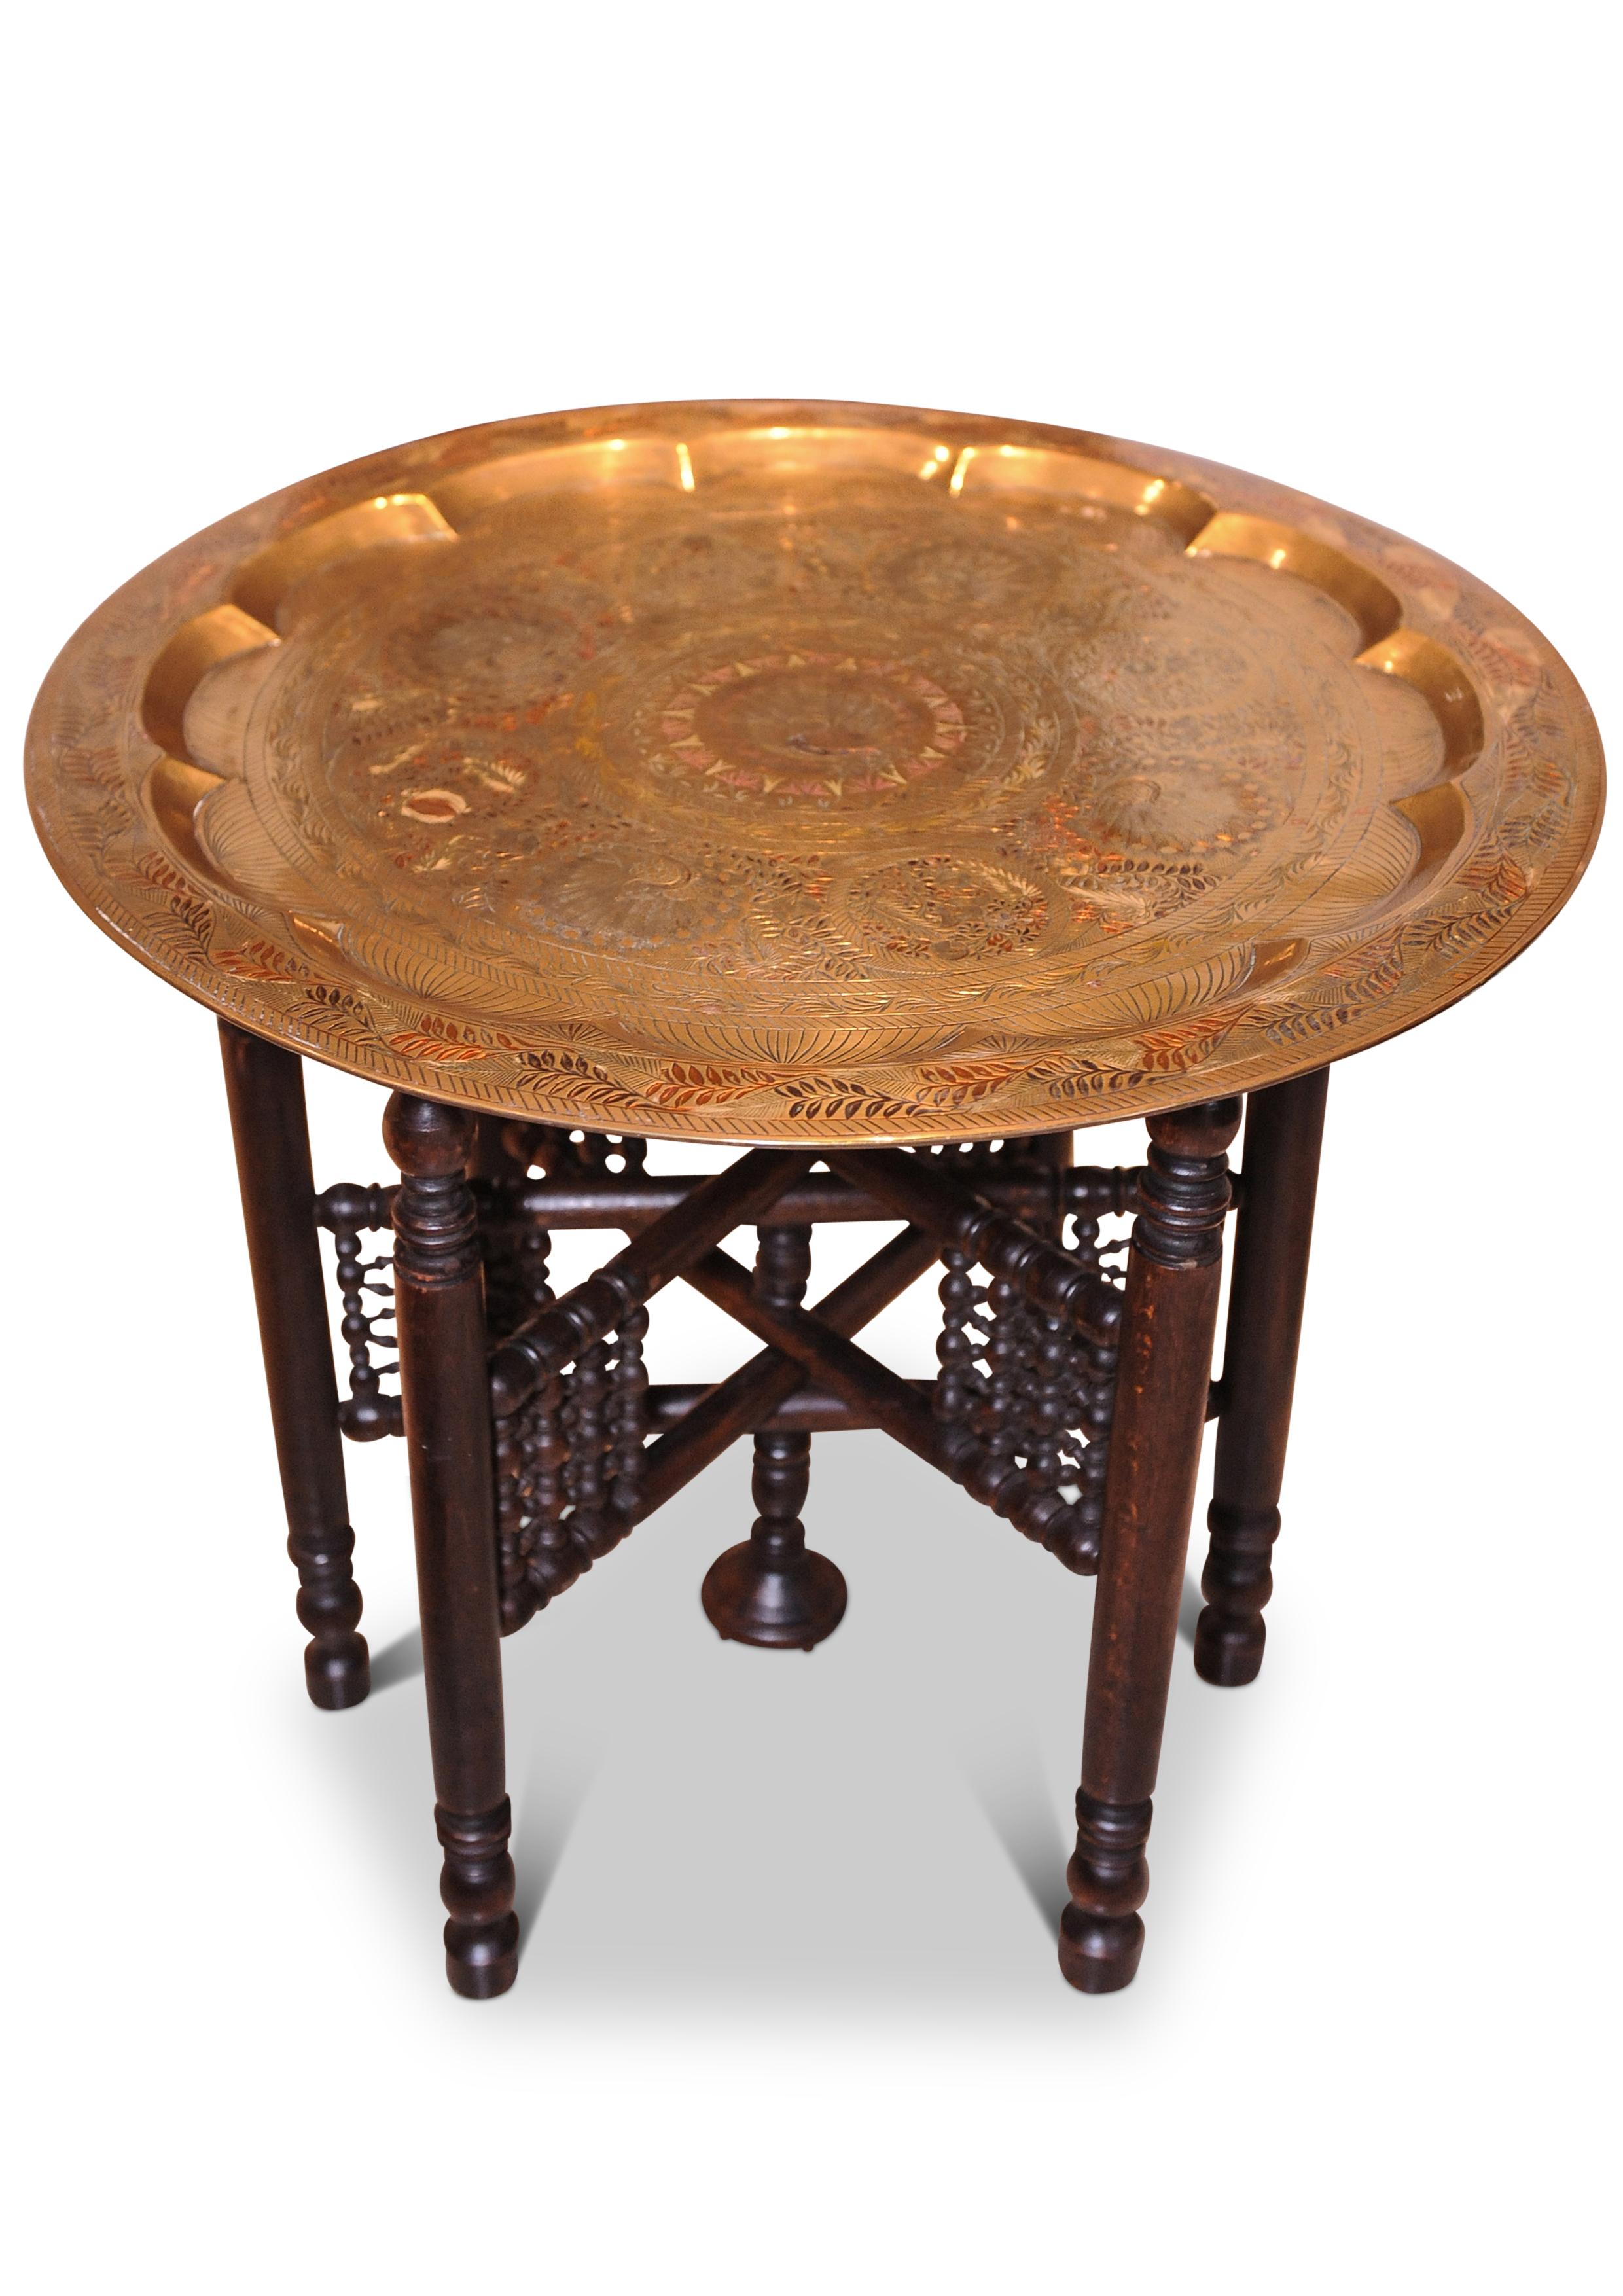 Early 20th century brass and hardwood tea table decorated with peacocks from the middle east
Table folds.

.